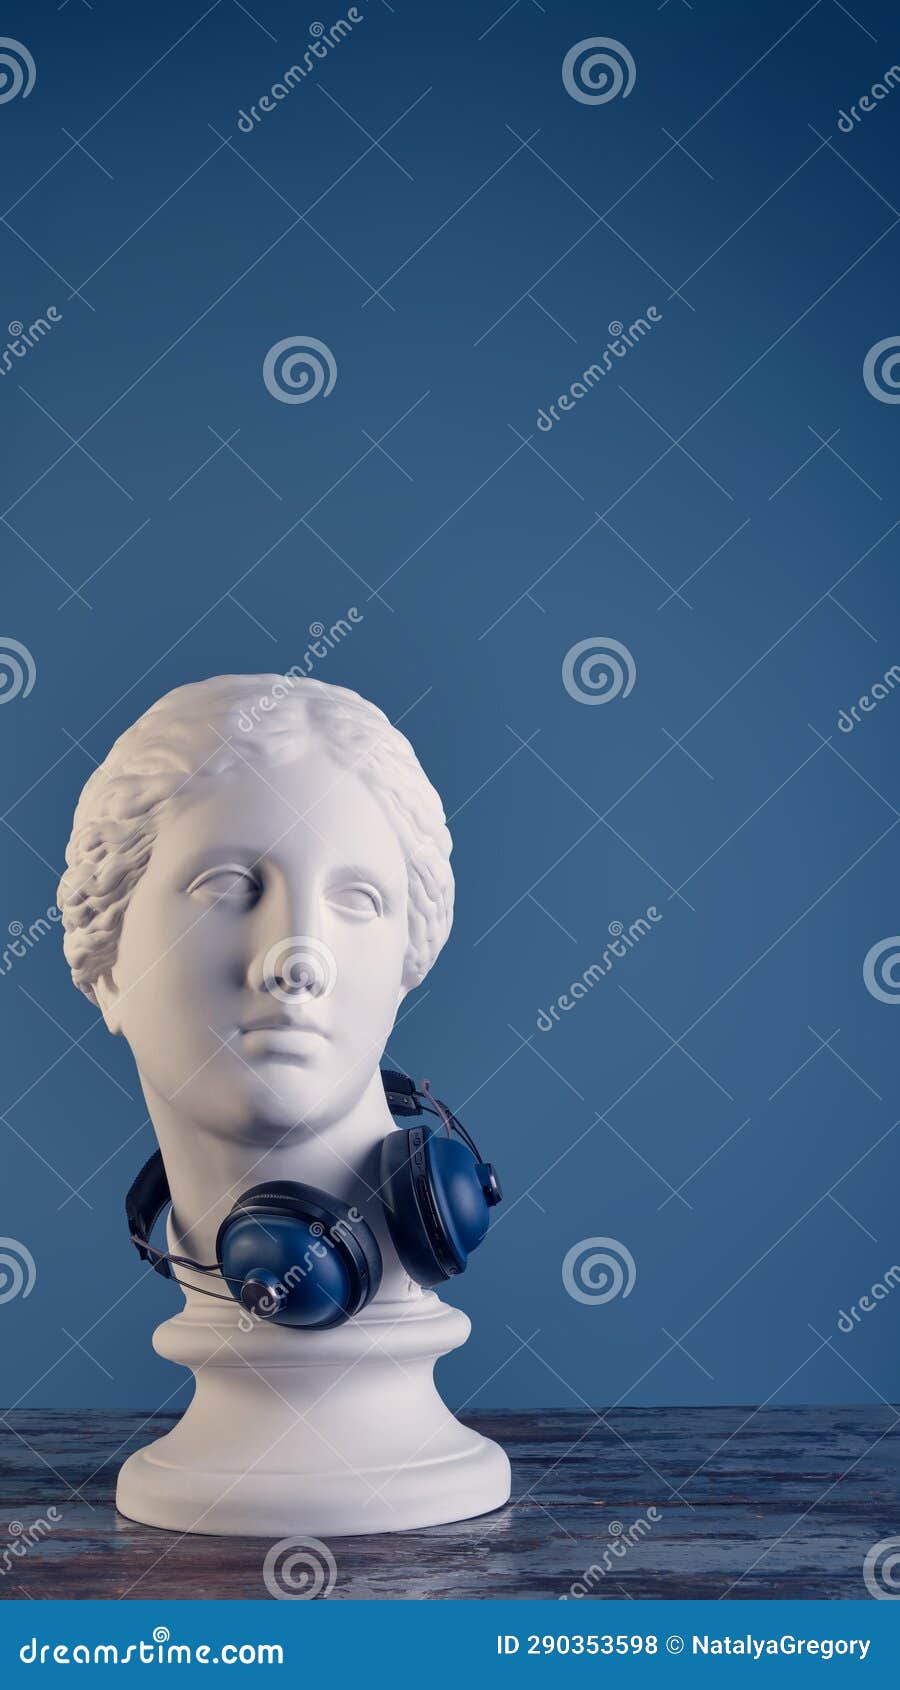 Plaster Bust of a Graceful Aphrodite with Huge Blue Audio Wireless  Headphones Looking at a Black Vinyl Record. Stock Image - Image of bust,  collection: 278539763